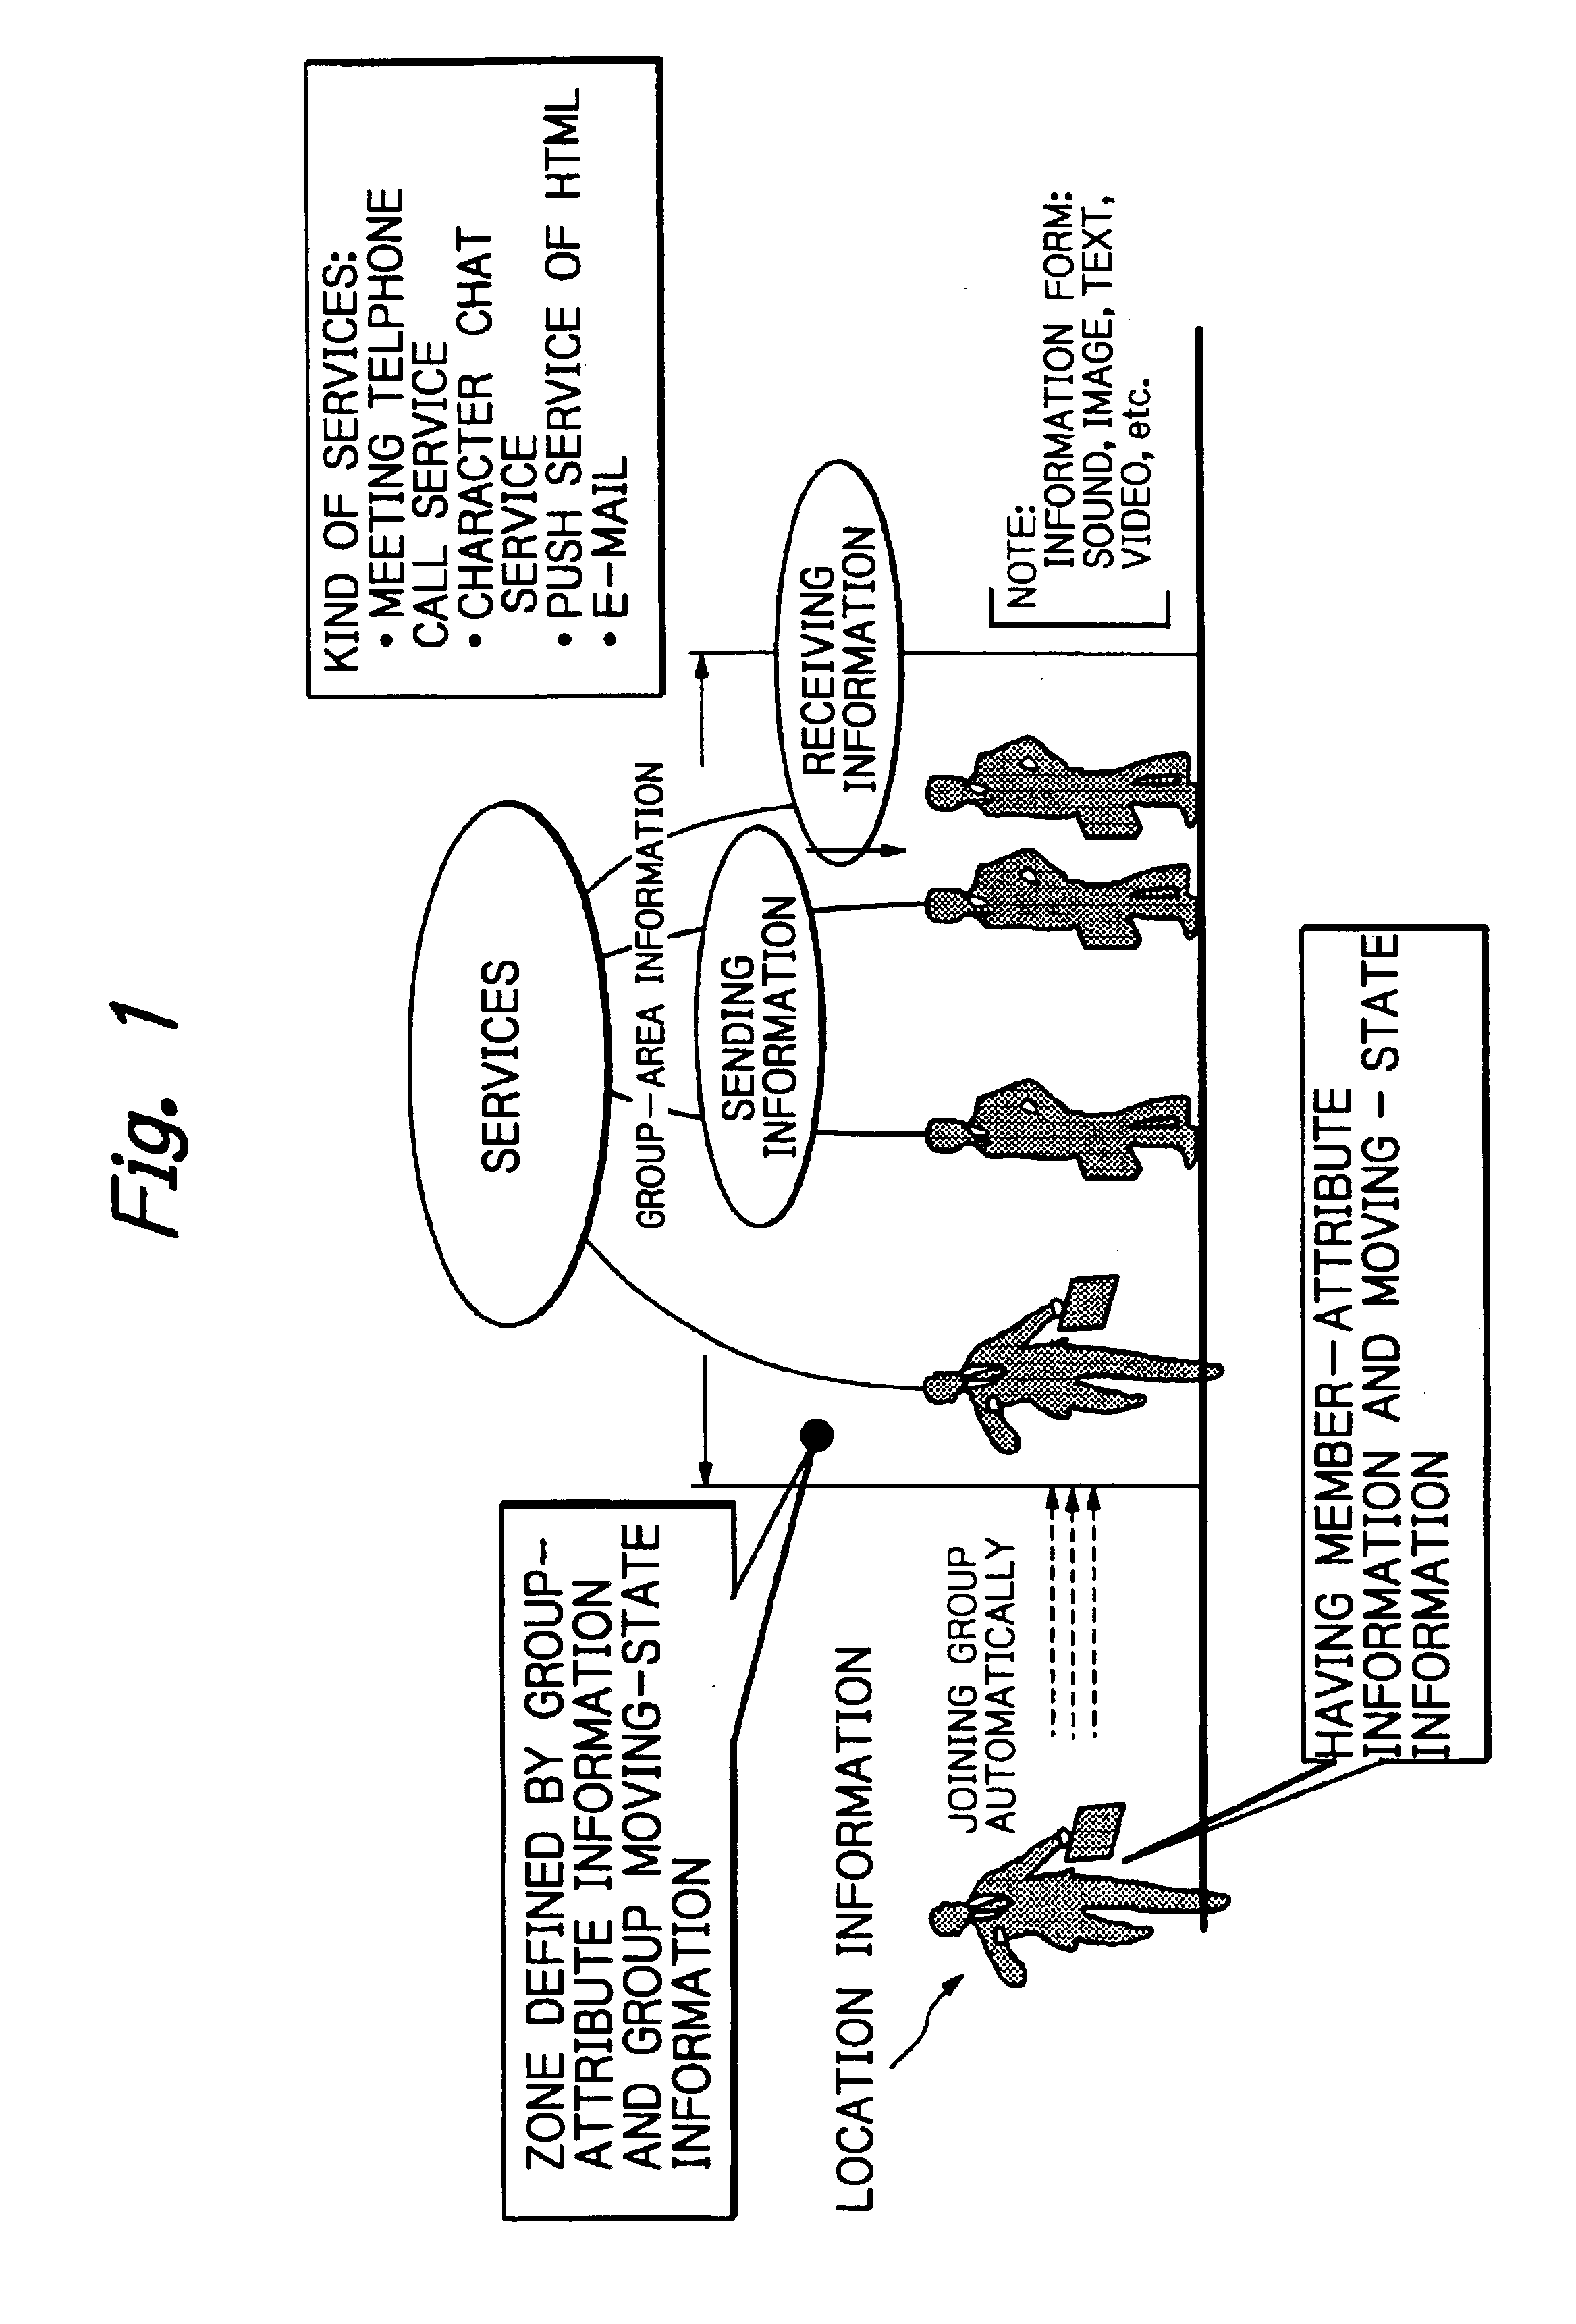 Group communication system for mobile terminals having real time communication capabilities